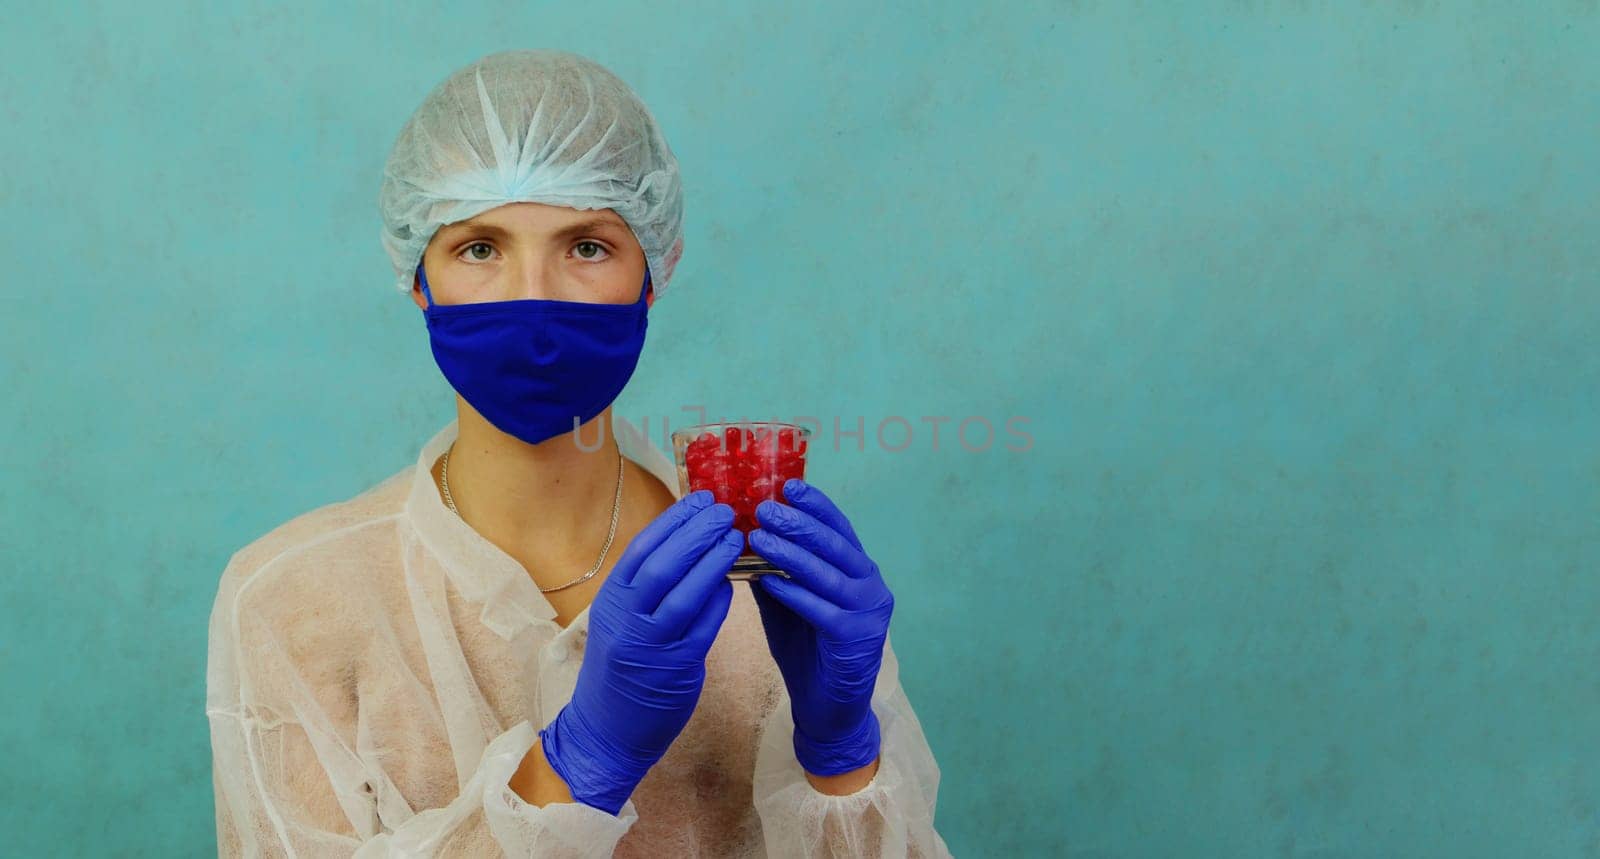 A guy in blue gloves and hat and a white coat is holding a glass of red pills against a studio background. by gelog67